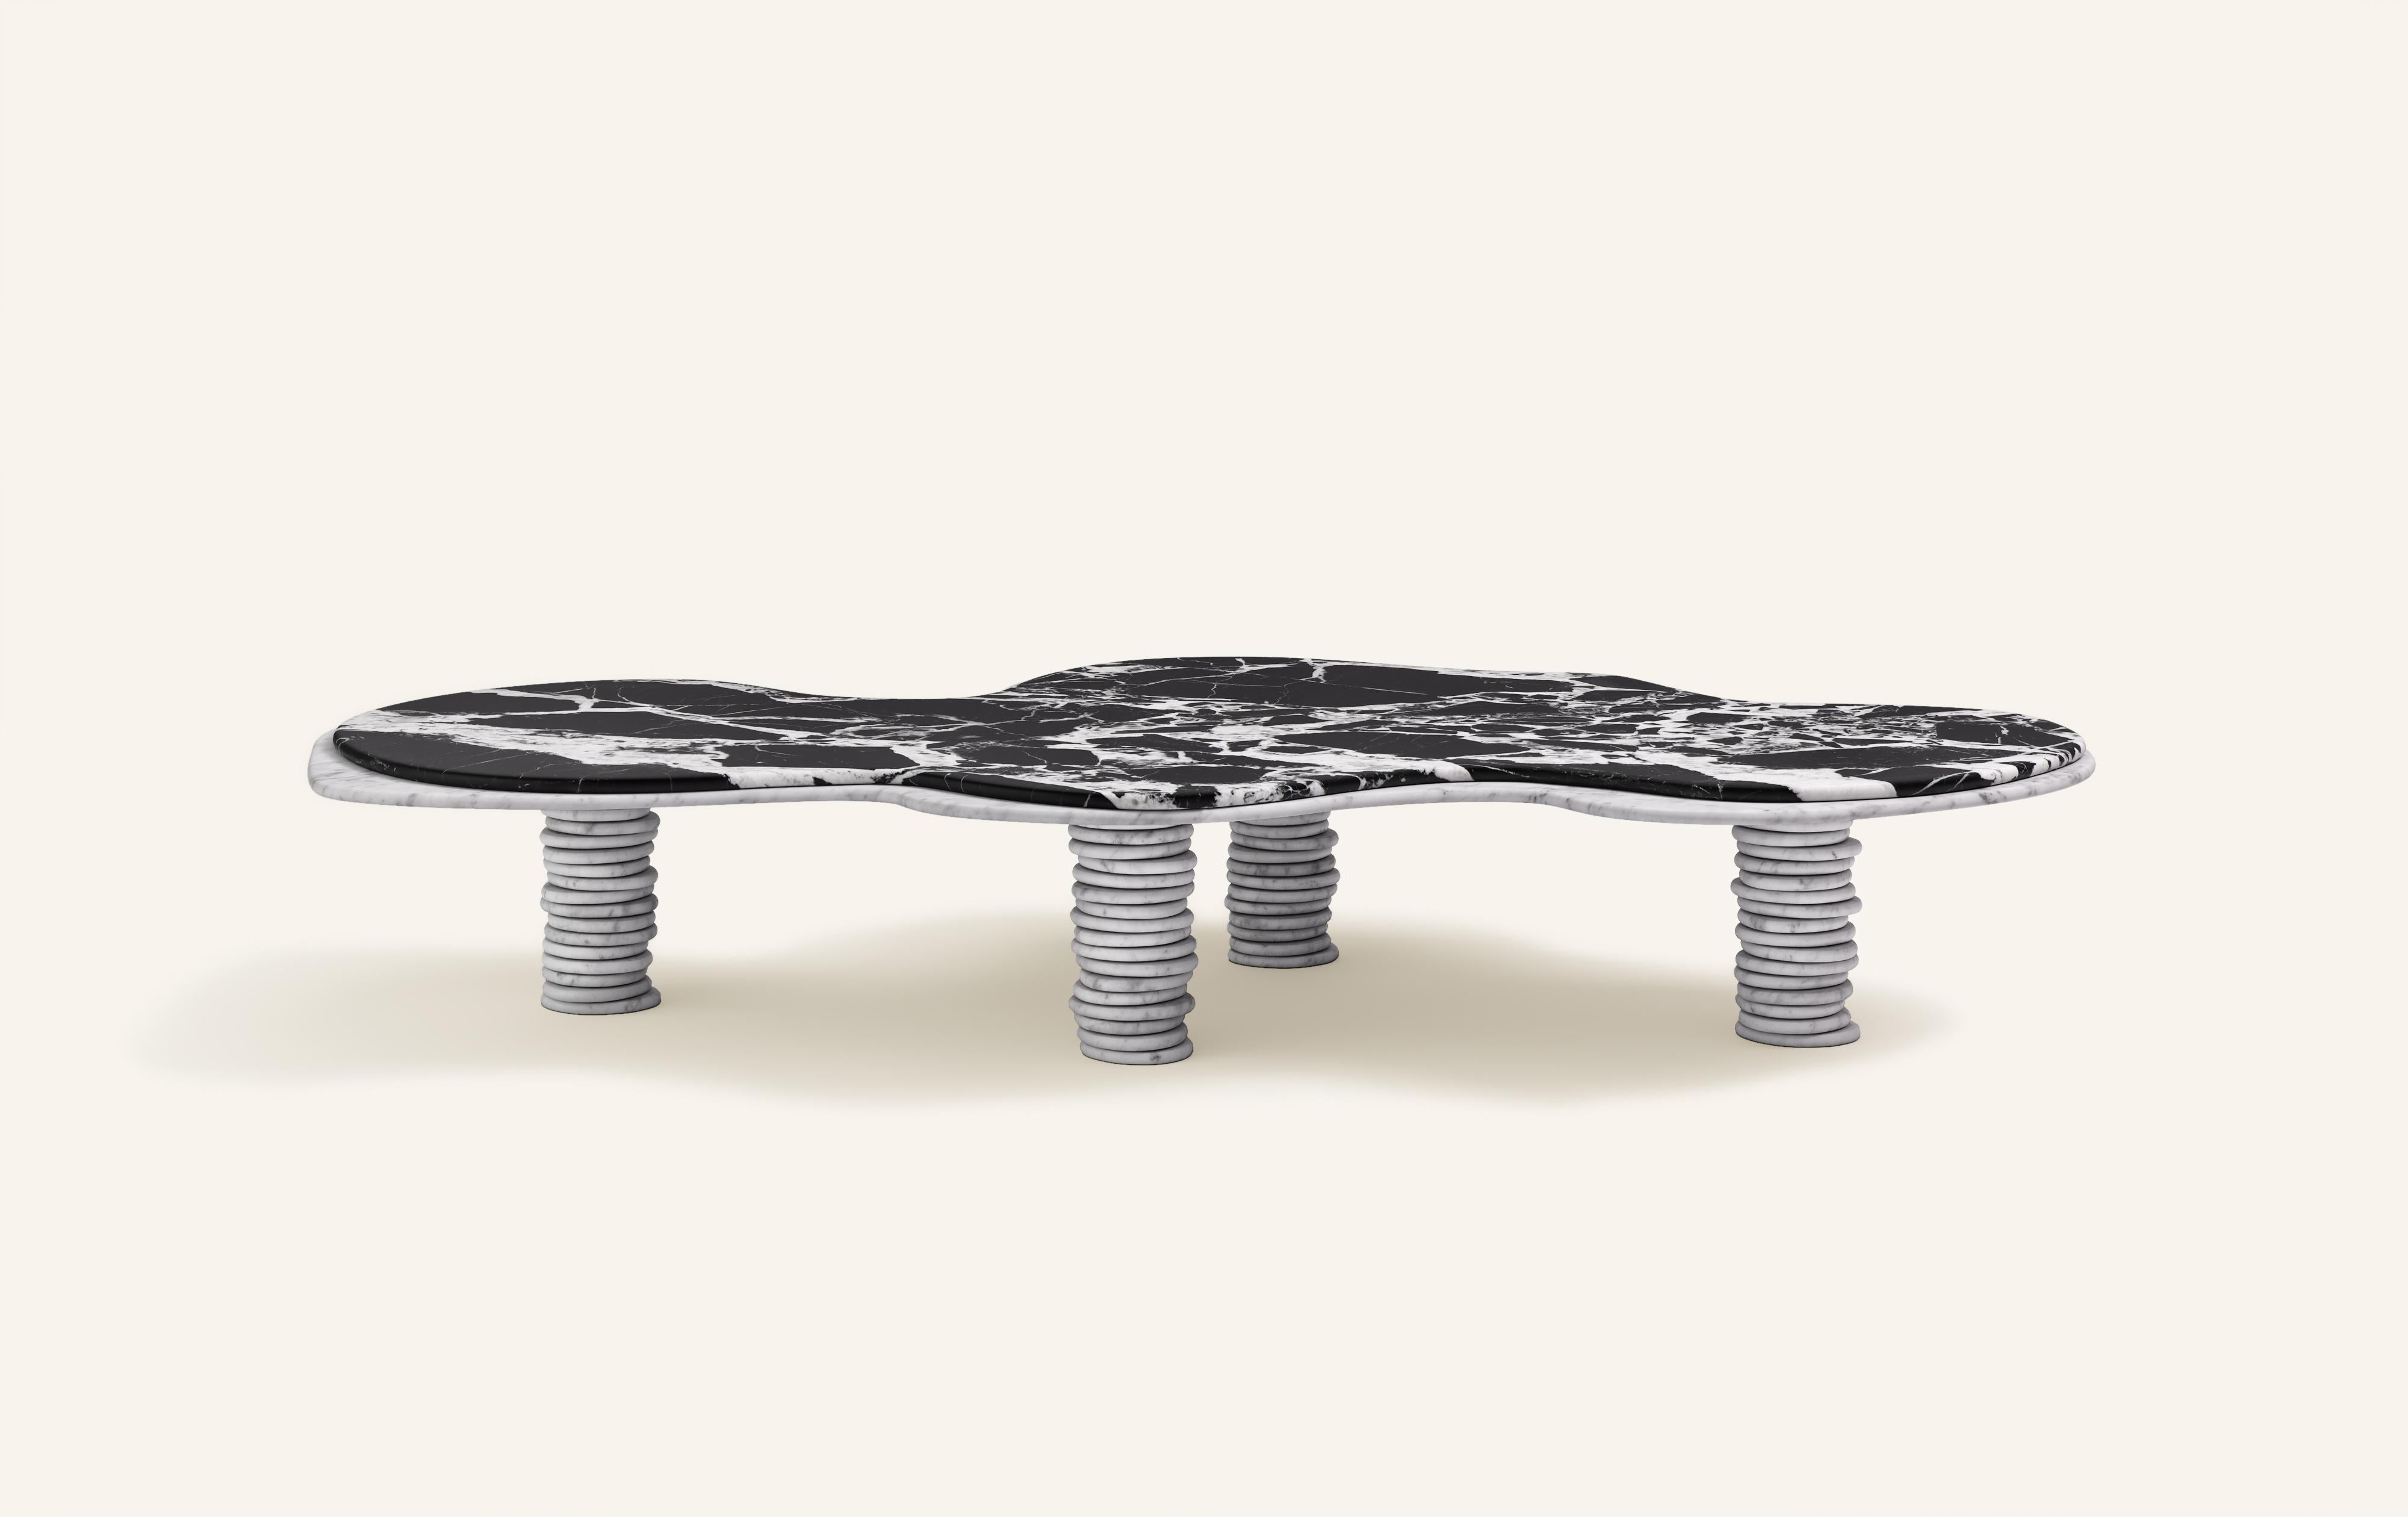 'ONDA', ITALIAN FOR 'WAVE', HAS INSPIRED A FREEFORM ORGANIC BODY, HEROING A COMPLEX AND TEXTURED COLLECTION. COMPRISING SIDE TABLES FOR LAYERING, COFFEE TABLES AND DINING TABLES.

DIMENSIONS:
72”L x 39-1/2”W x 14-3/16”H: 
- 1.5